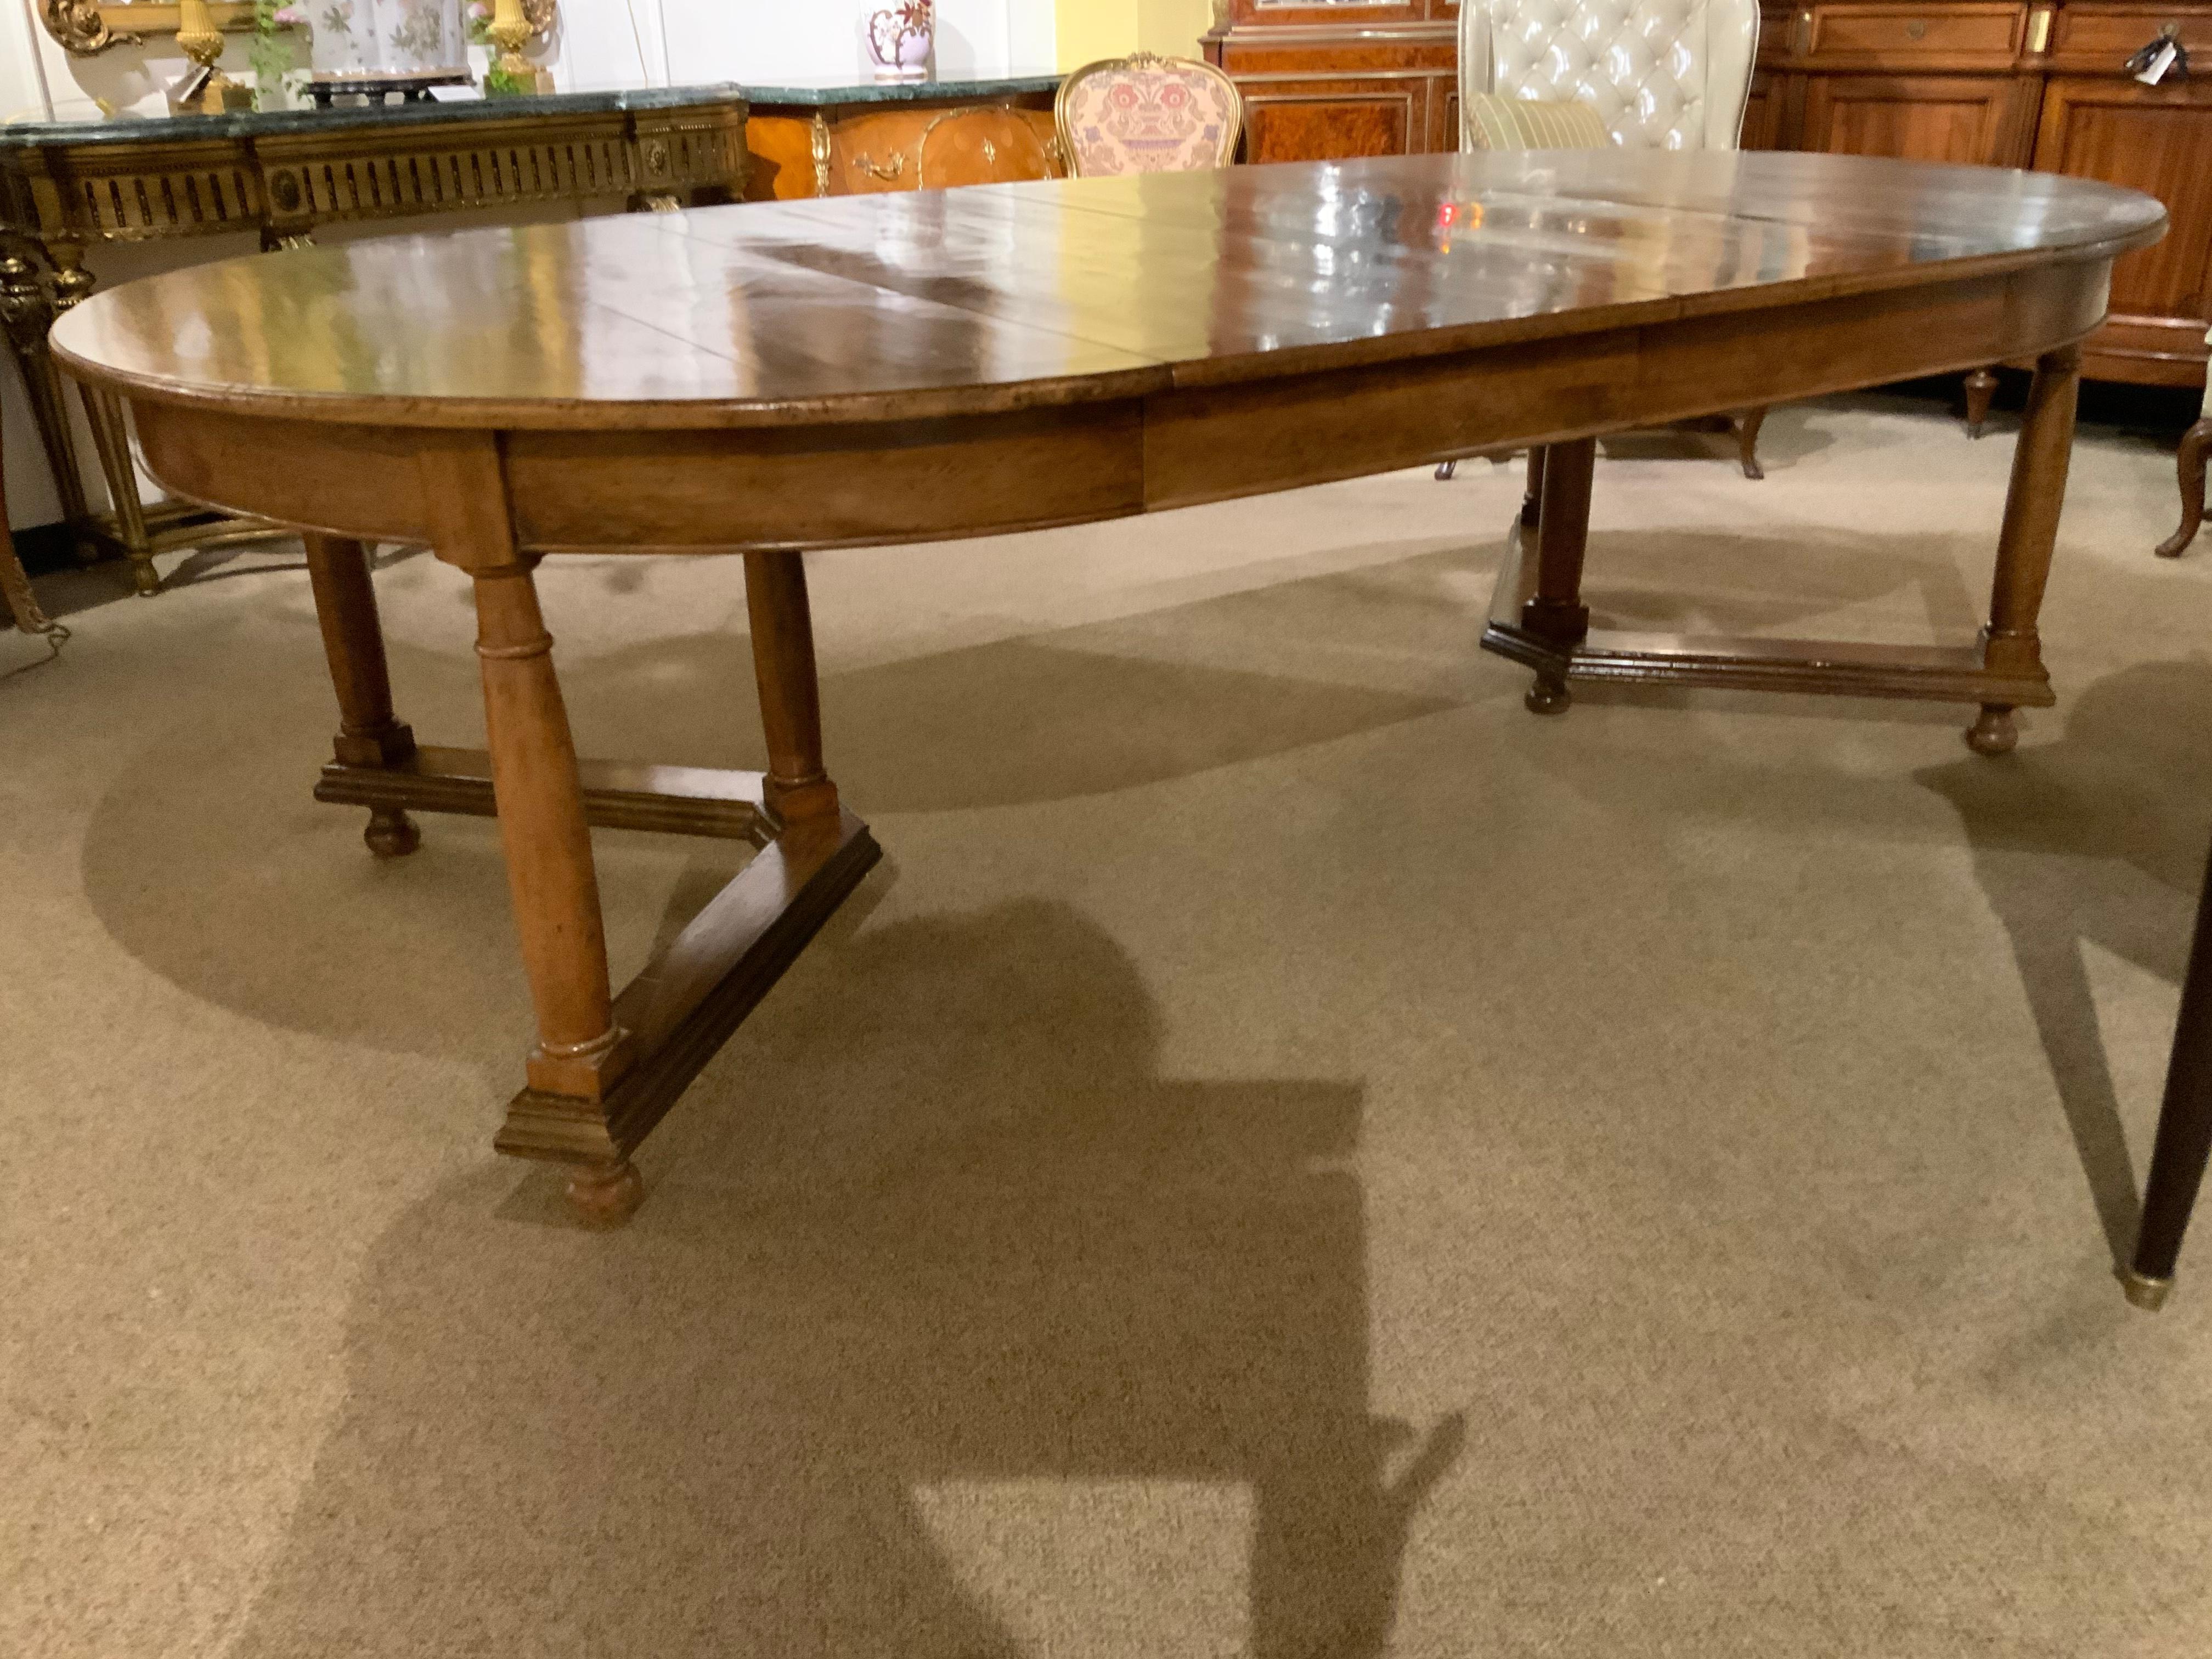 Handsome Oval Shaped Dining Table with Star Inlay in the Top, V-Shaped Stretcher 1